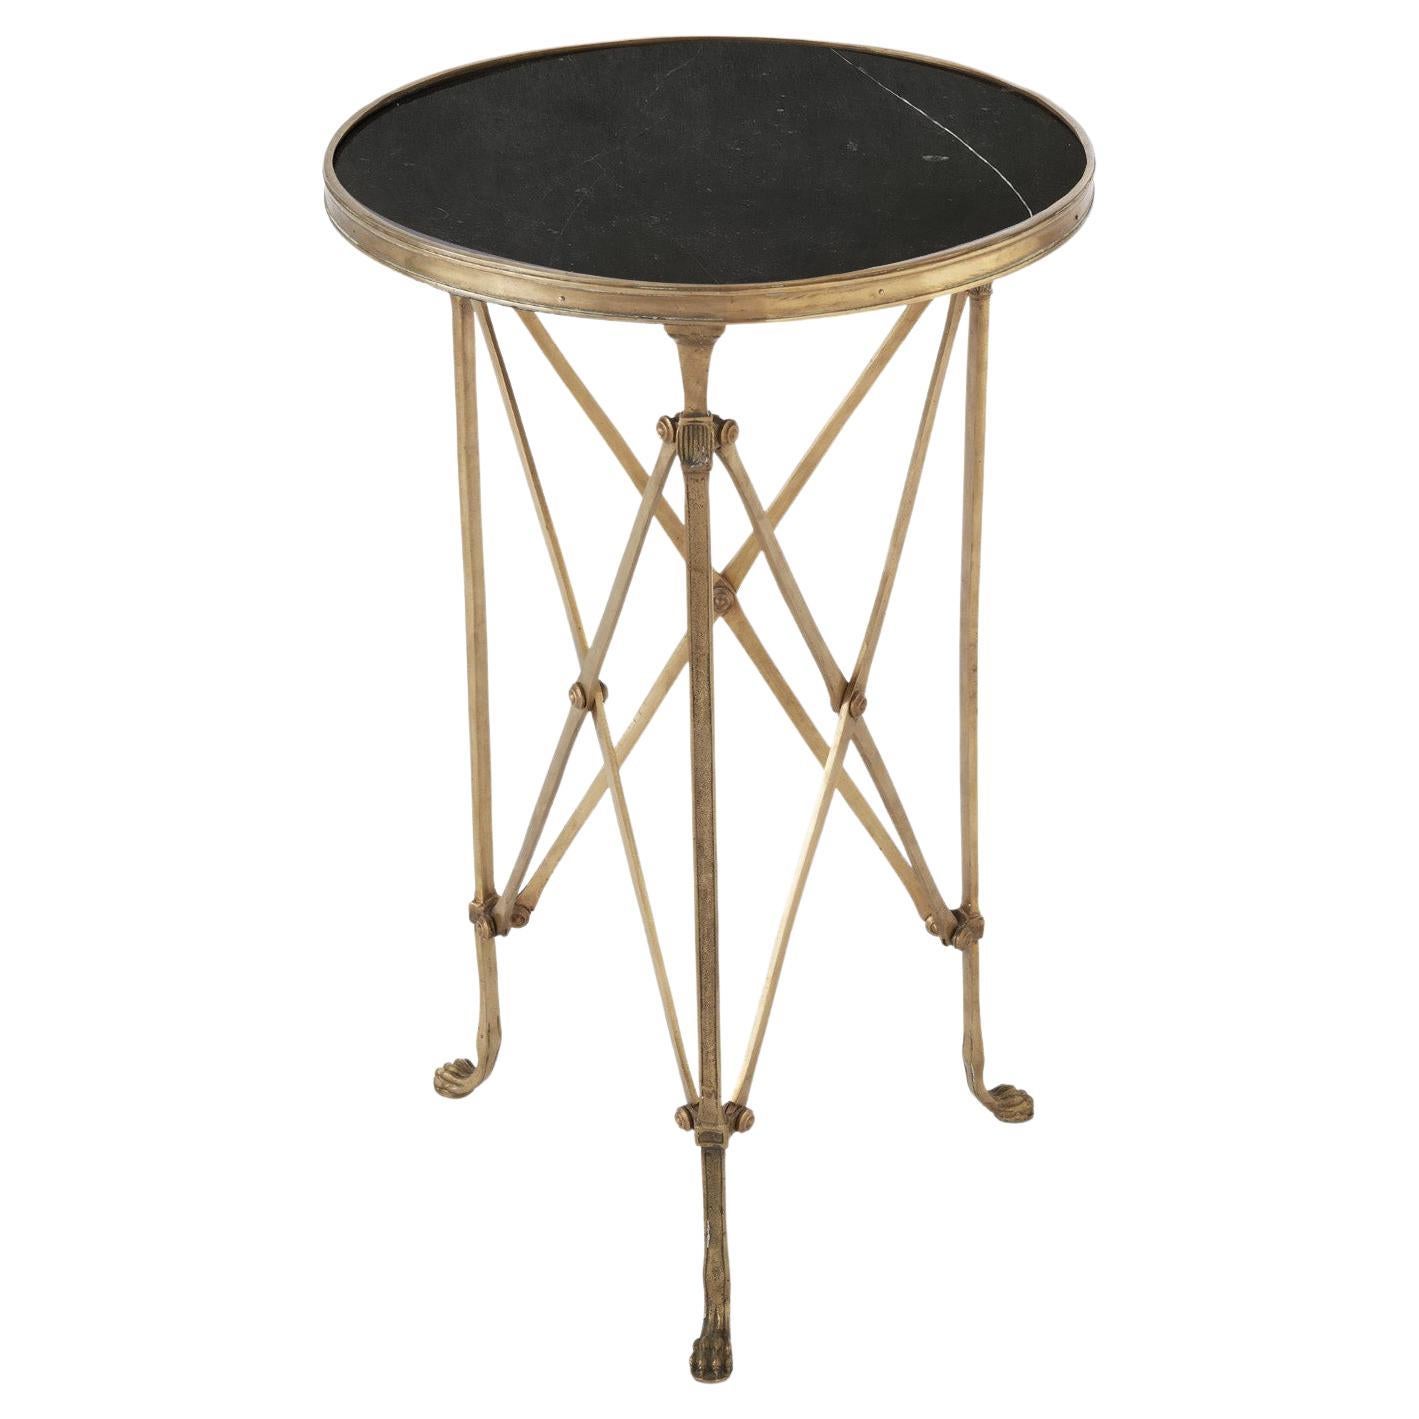 Global Views Directoire Table Brass and Black Marble with White Veining